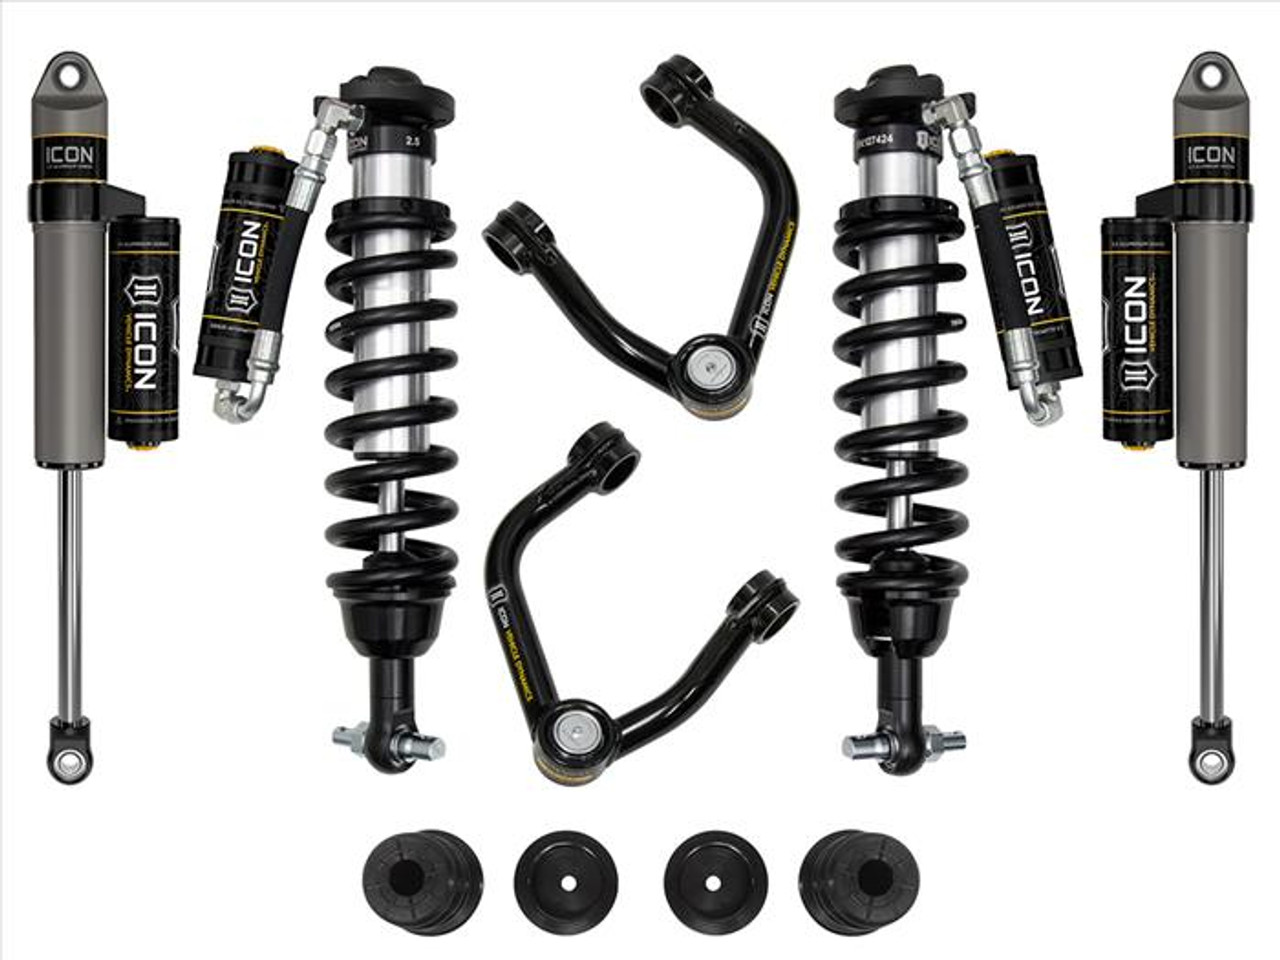  ICON 0-3.5" LIFT STAGE 4 SUSPENSION SYSTEM, TUBULAR UCA AL KNUCKLE for 2019 to 2021 Ford Ranger (K93204TA)